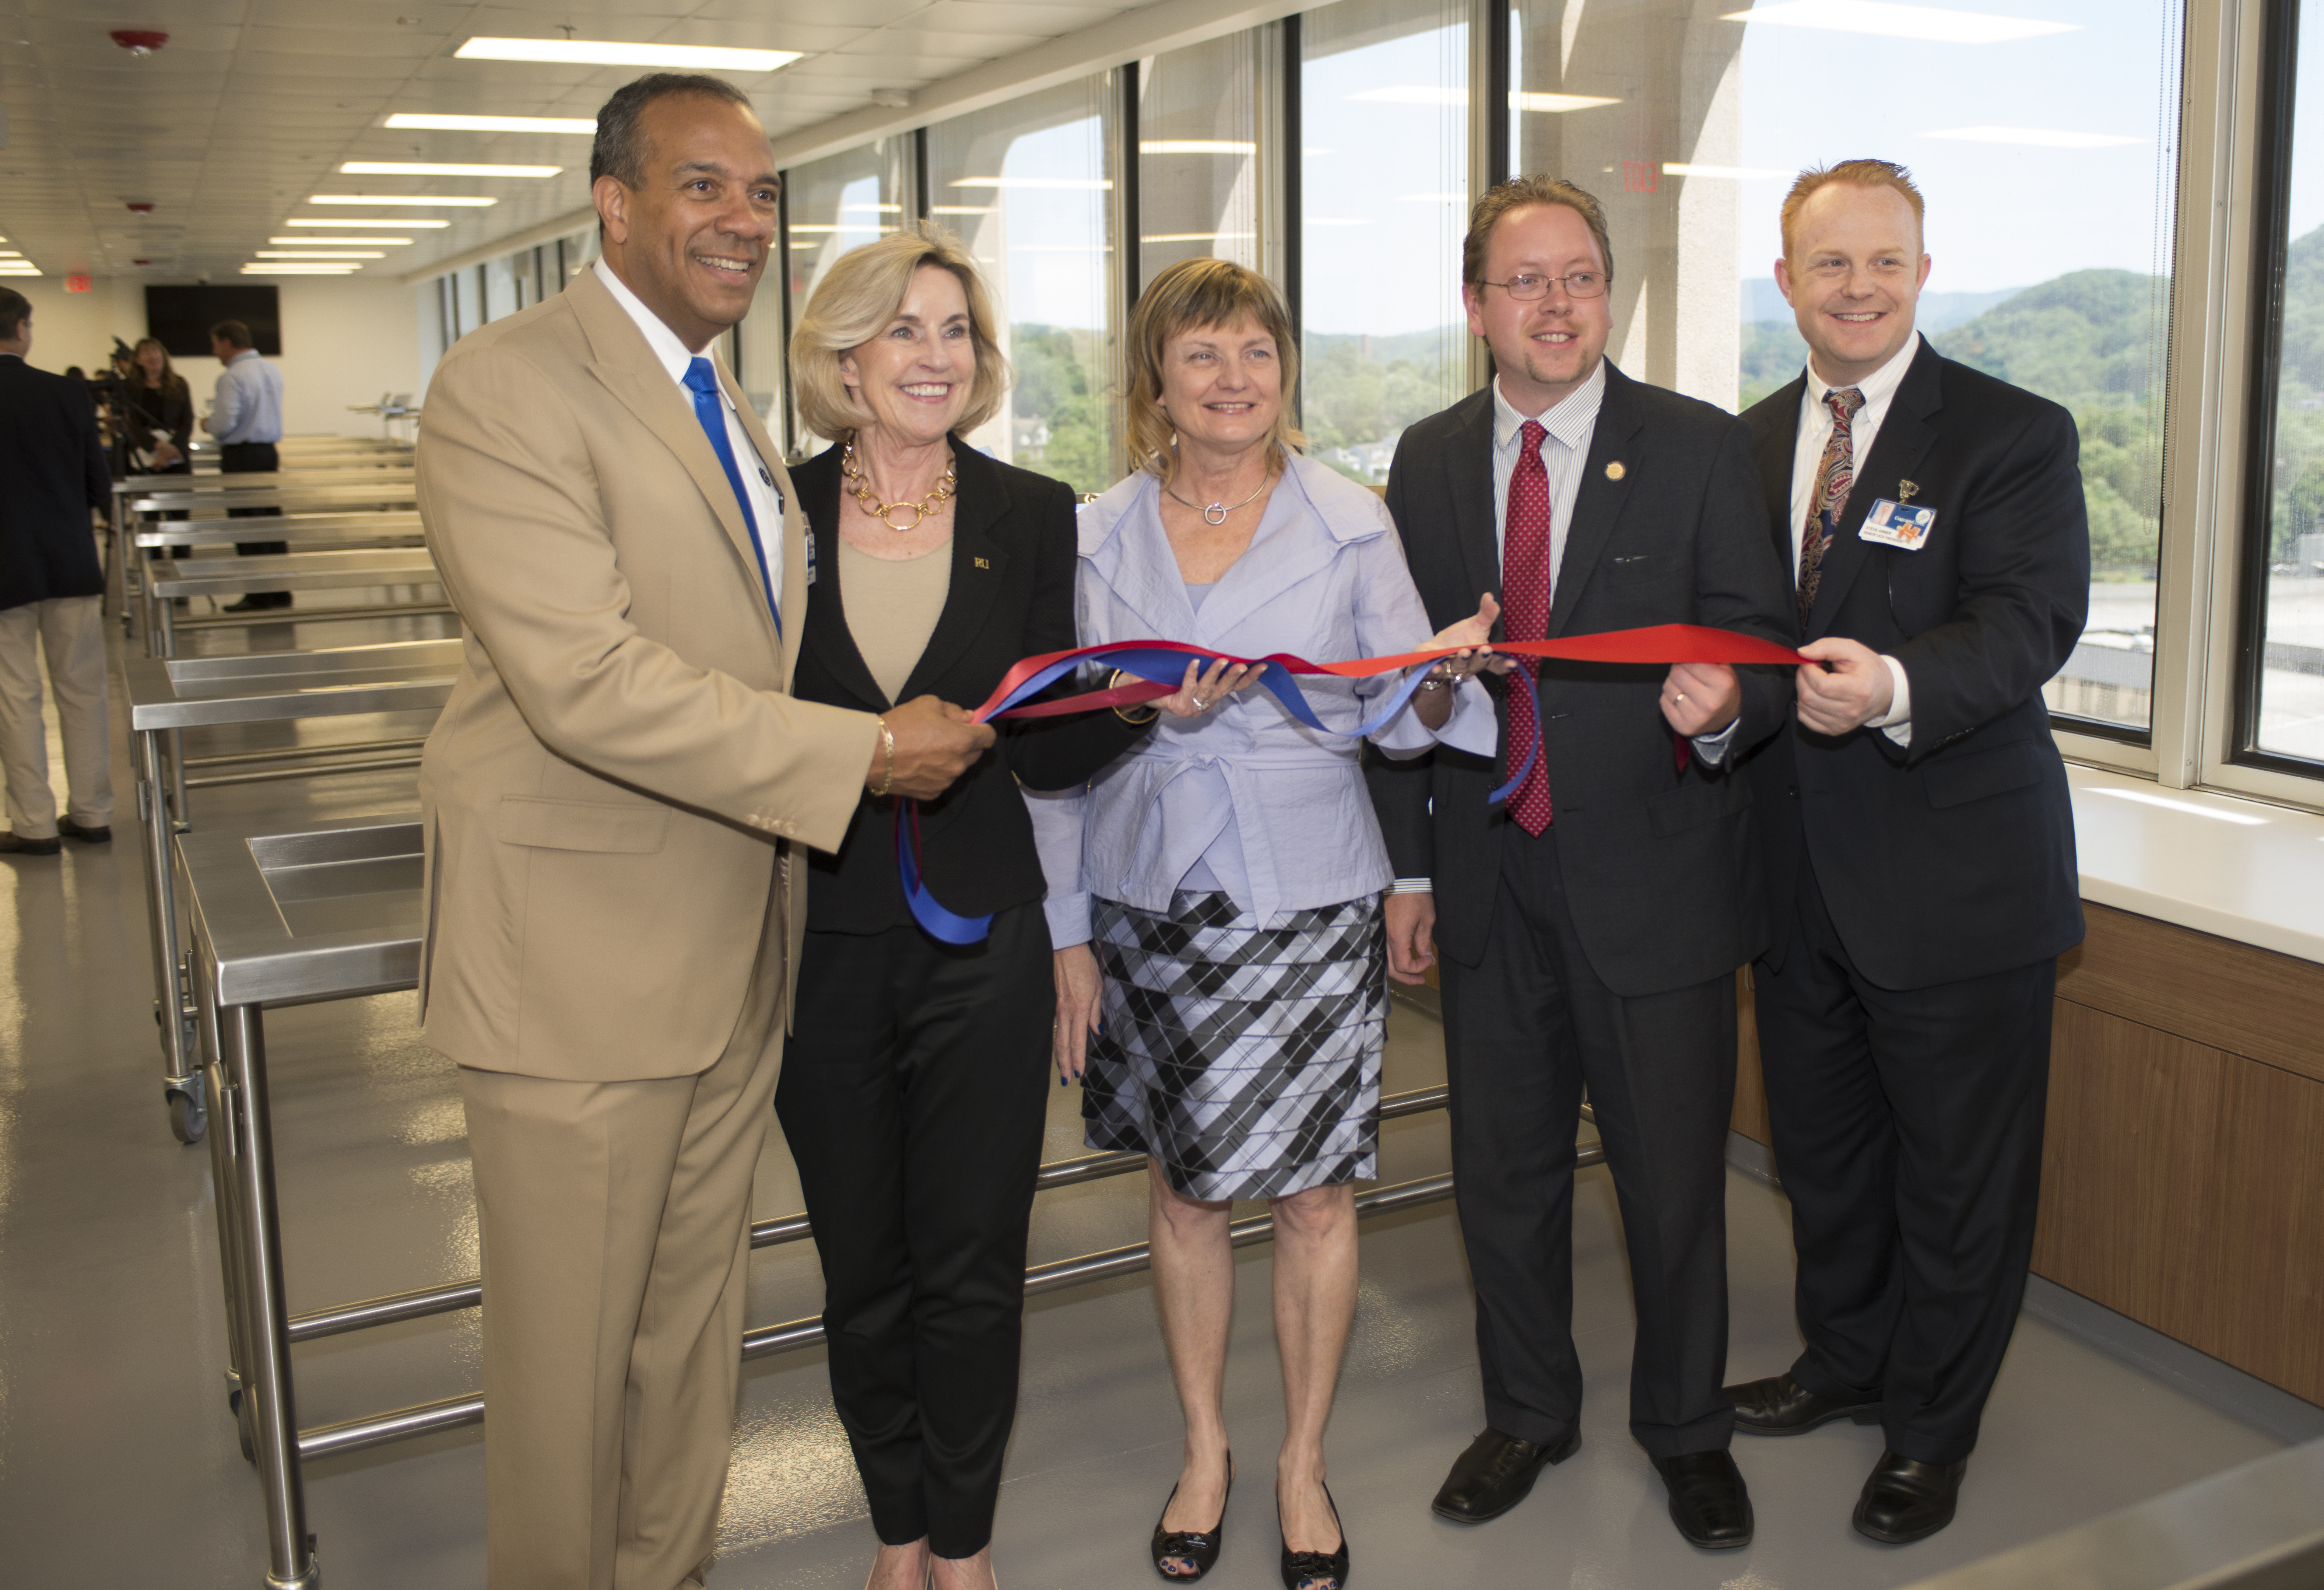 Holding the cut ribbon were Nathaniel L. Bishop, president of Jefferson College of Health Sciences; Penelope Kyle, president of Radford University; Dr. Cynda Johnson, dean of the Virginia Tech Carilion School of Medicine; Delegate Joseph Yost; and Steve Arner, senior vice president and chief operating officer of Carilion Clinic